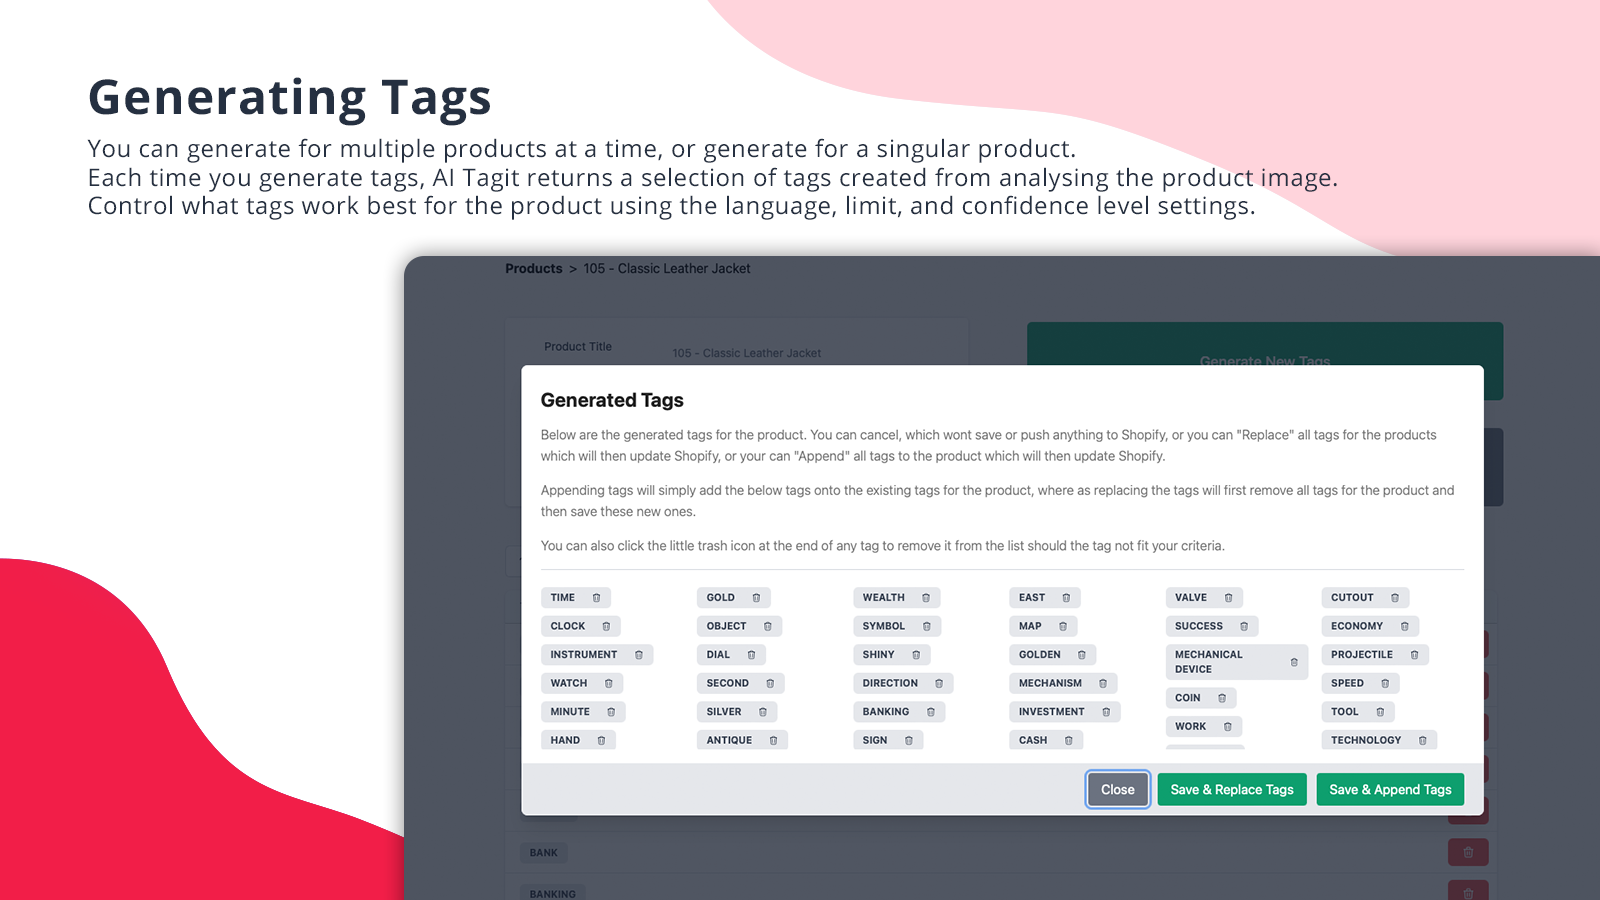 AI Tagit - Control Generated Tags